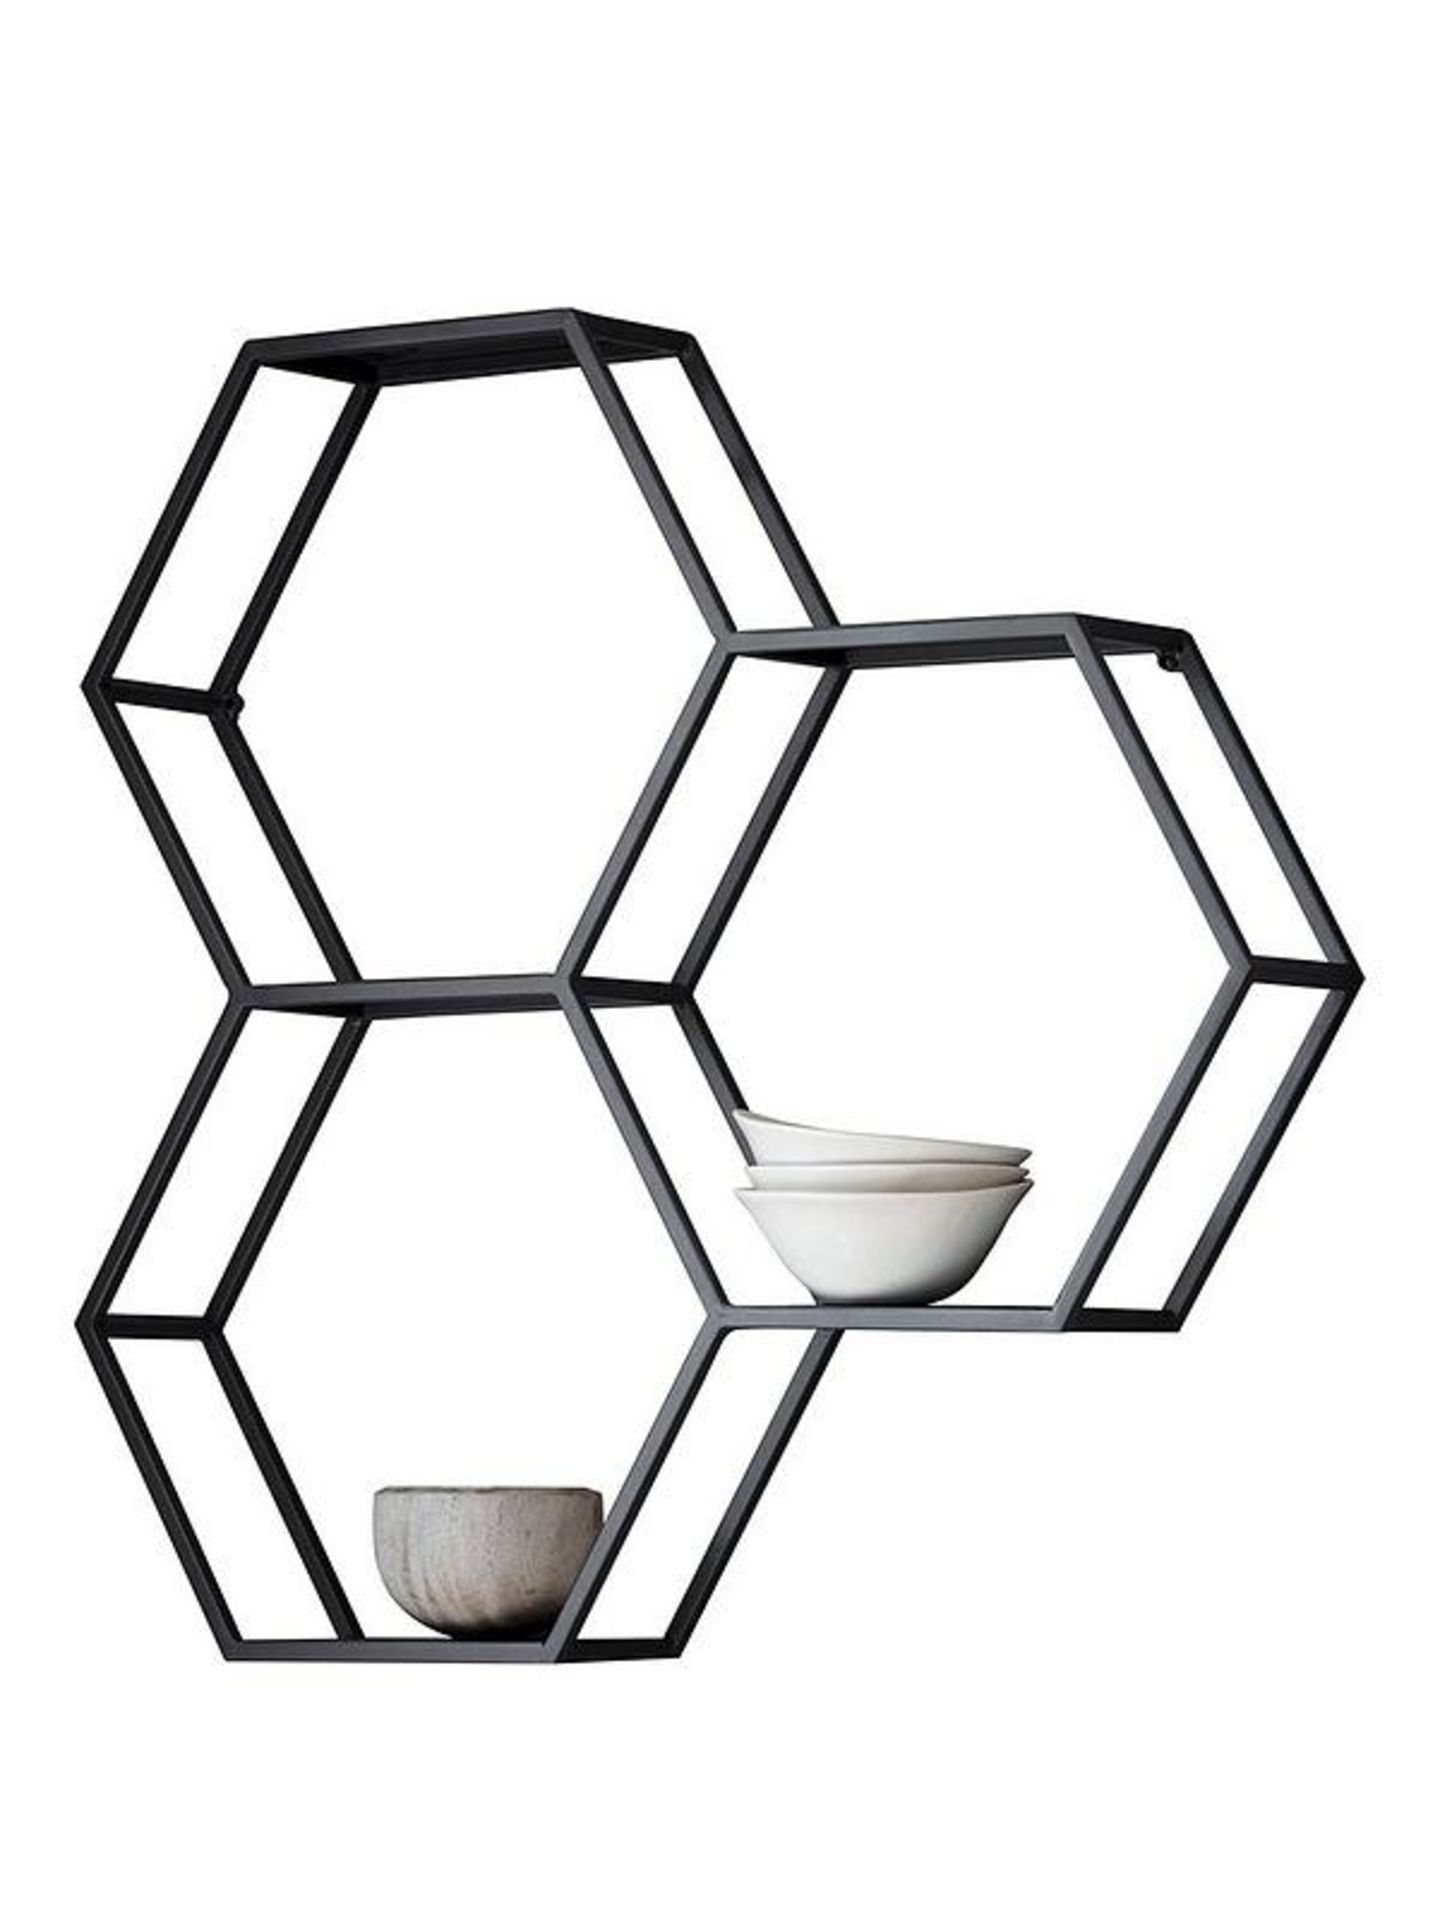 Hudson Gallery Heston Metal Hexagon Wall Mounted Storage Unit Shelf in Black - Brand New and Boxed